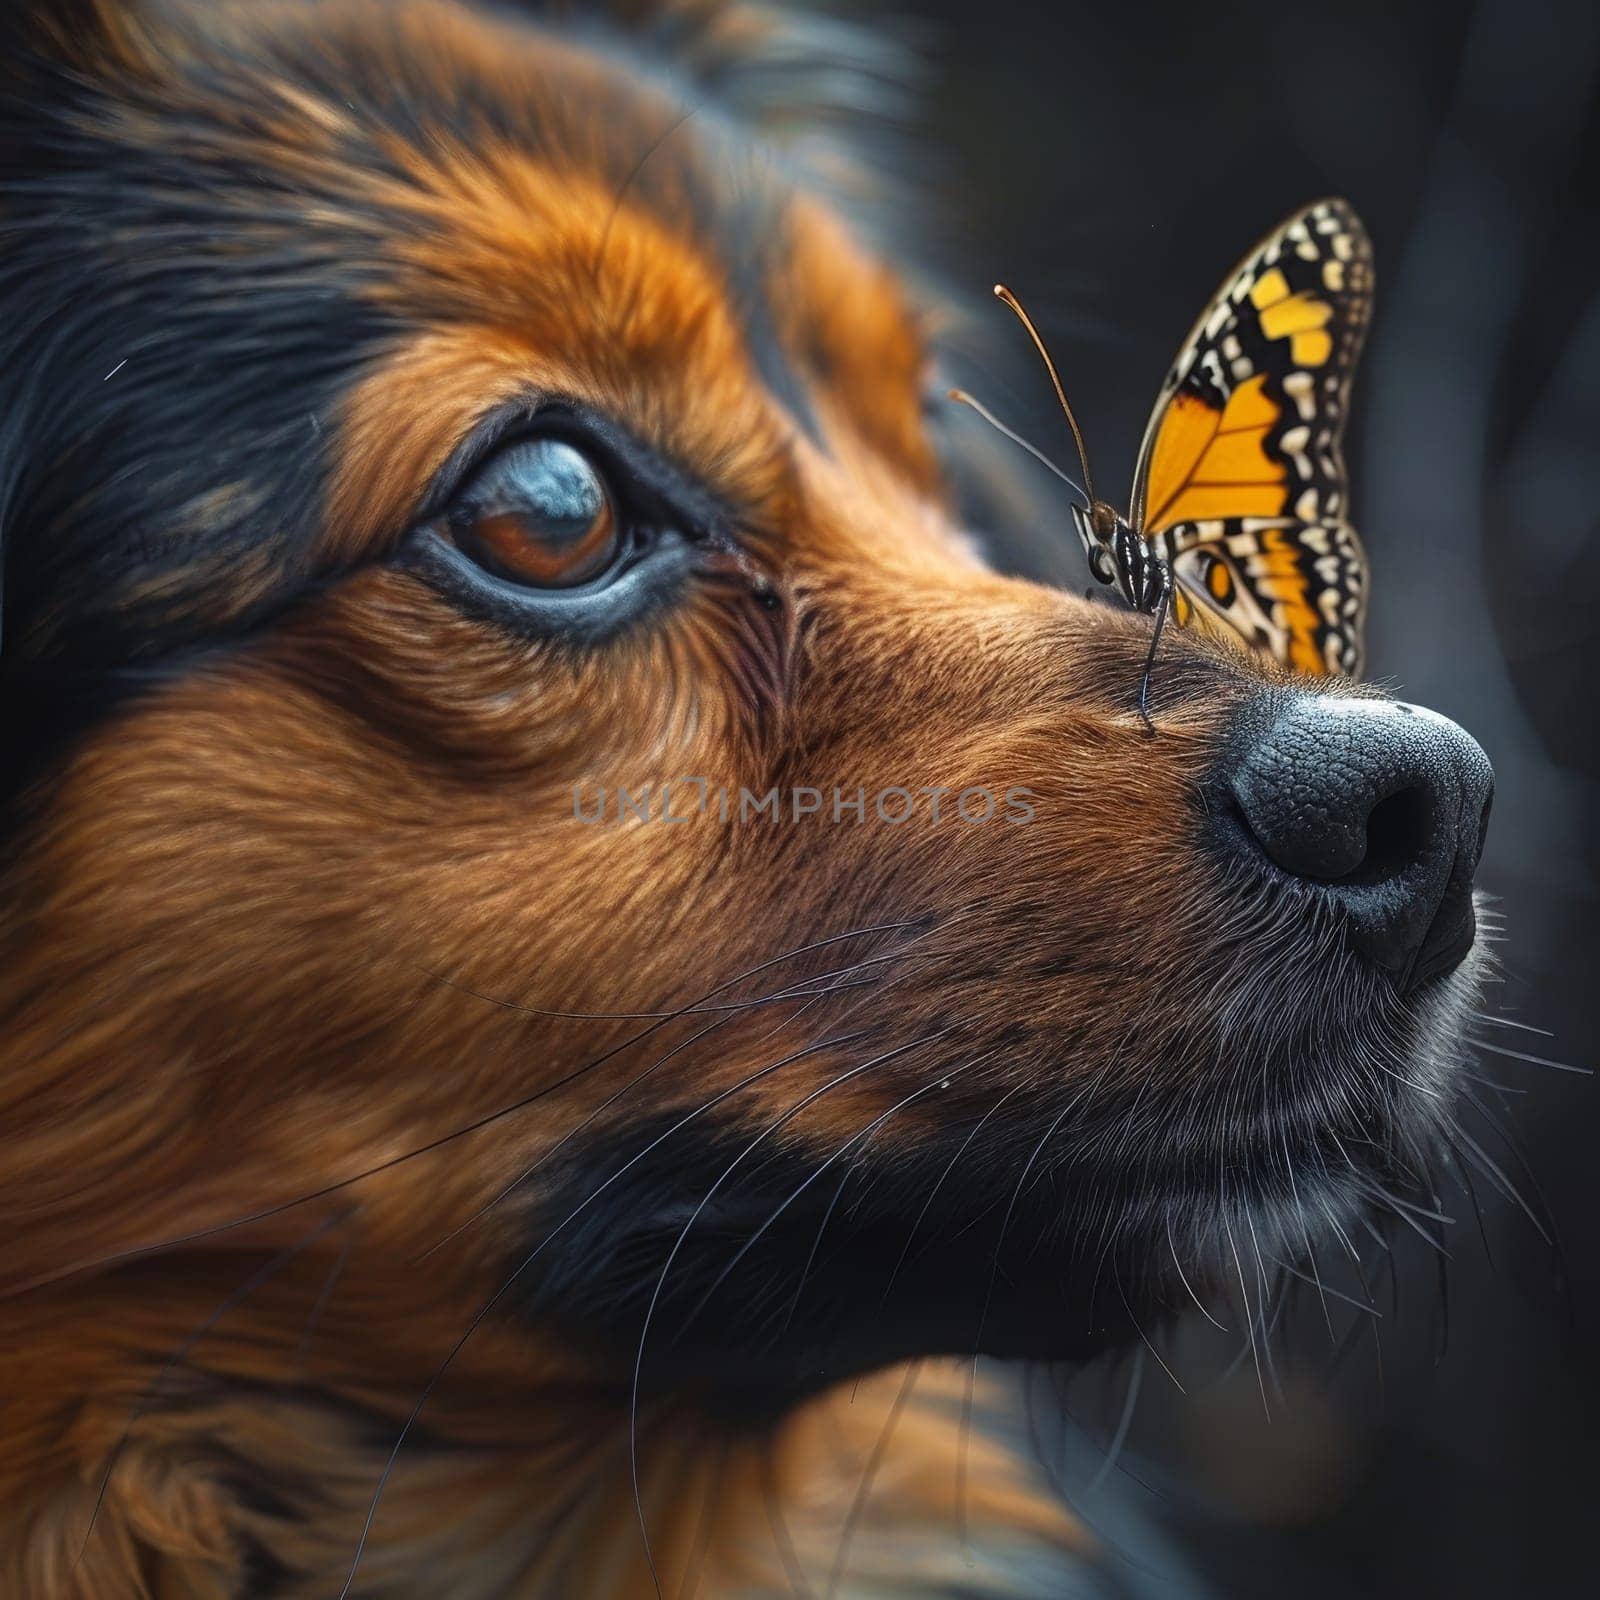 A close-up of a dog's face as a butterfly rests on its nose, capturing a moment of tranquil coexistence. The animal's gaze is diverted, allowing the delicate insect to perch peacefully.. by sfinks